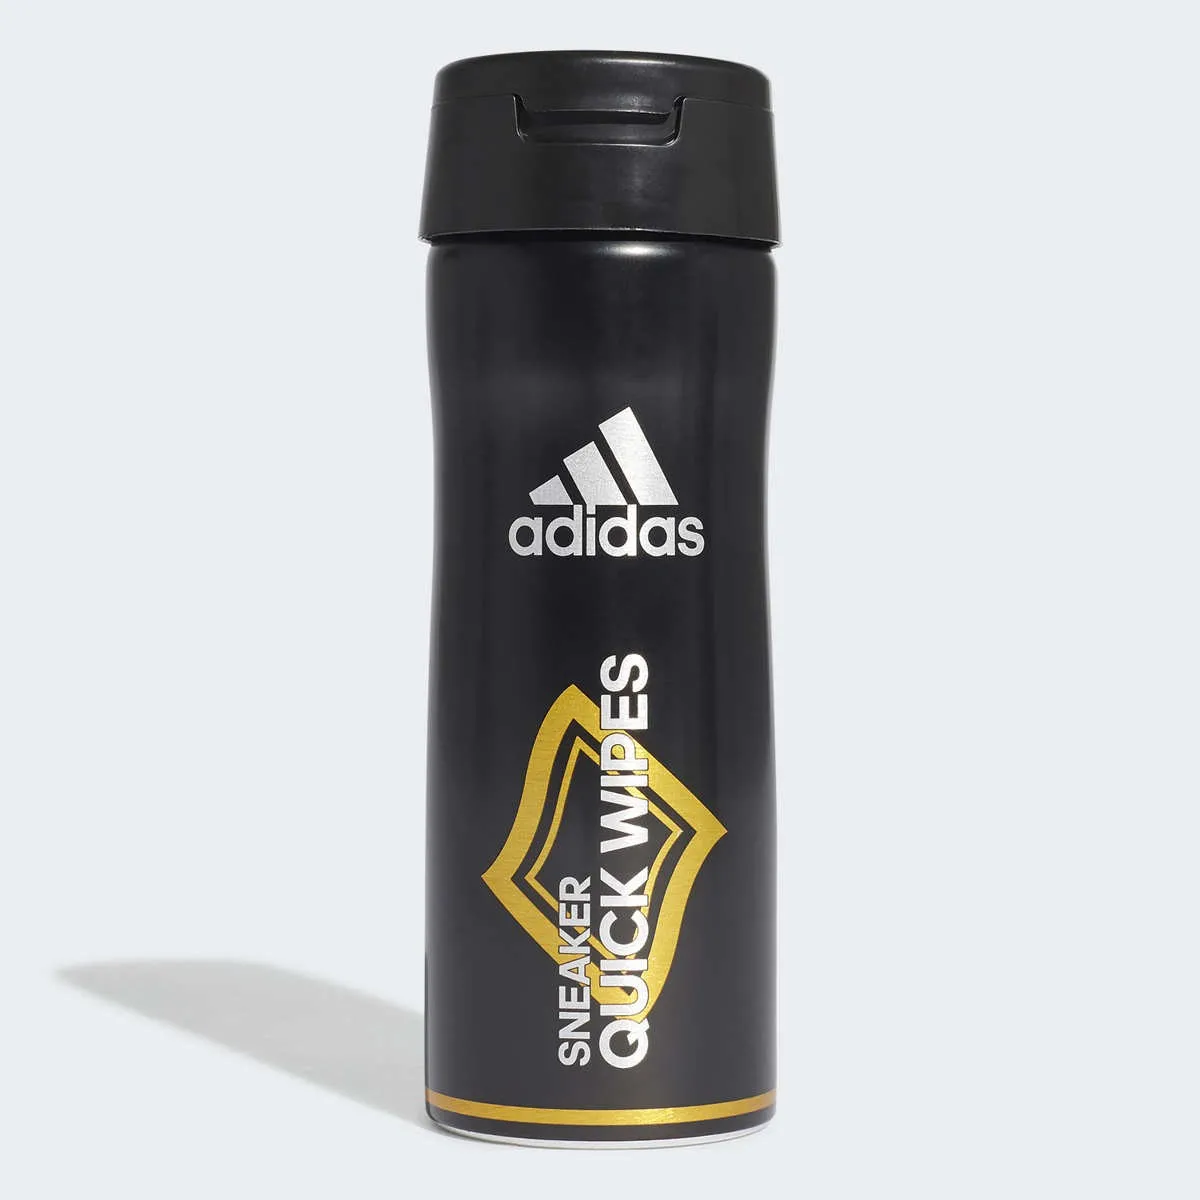 adidas sneaker quick wipes